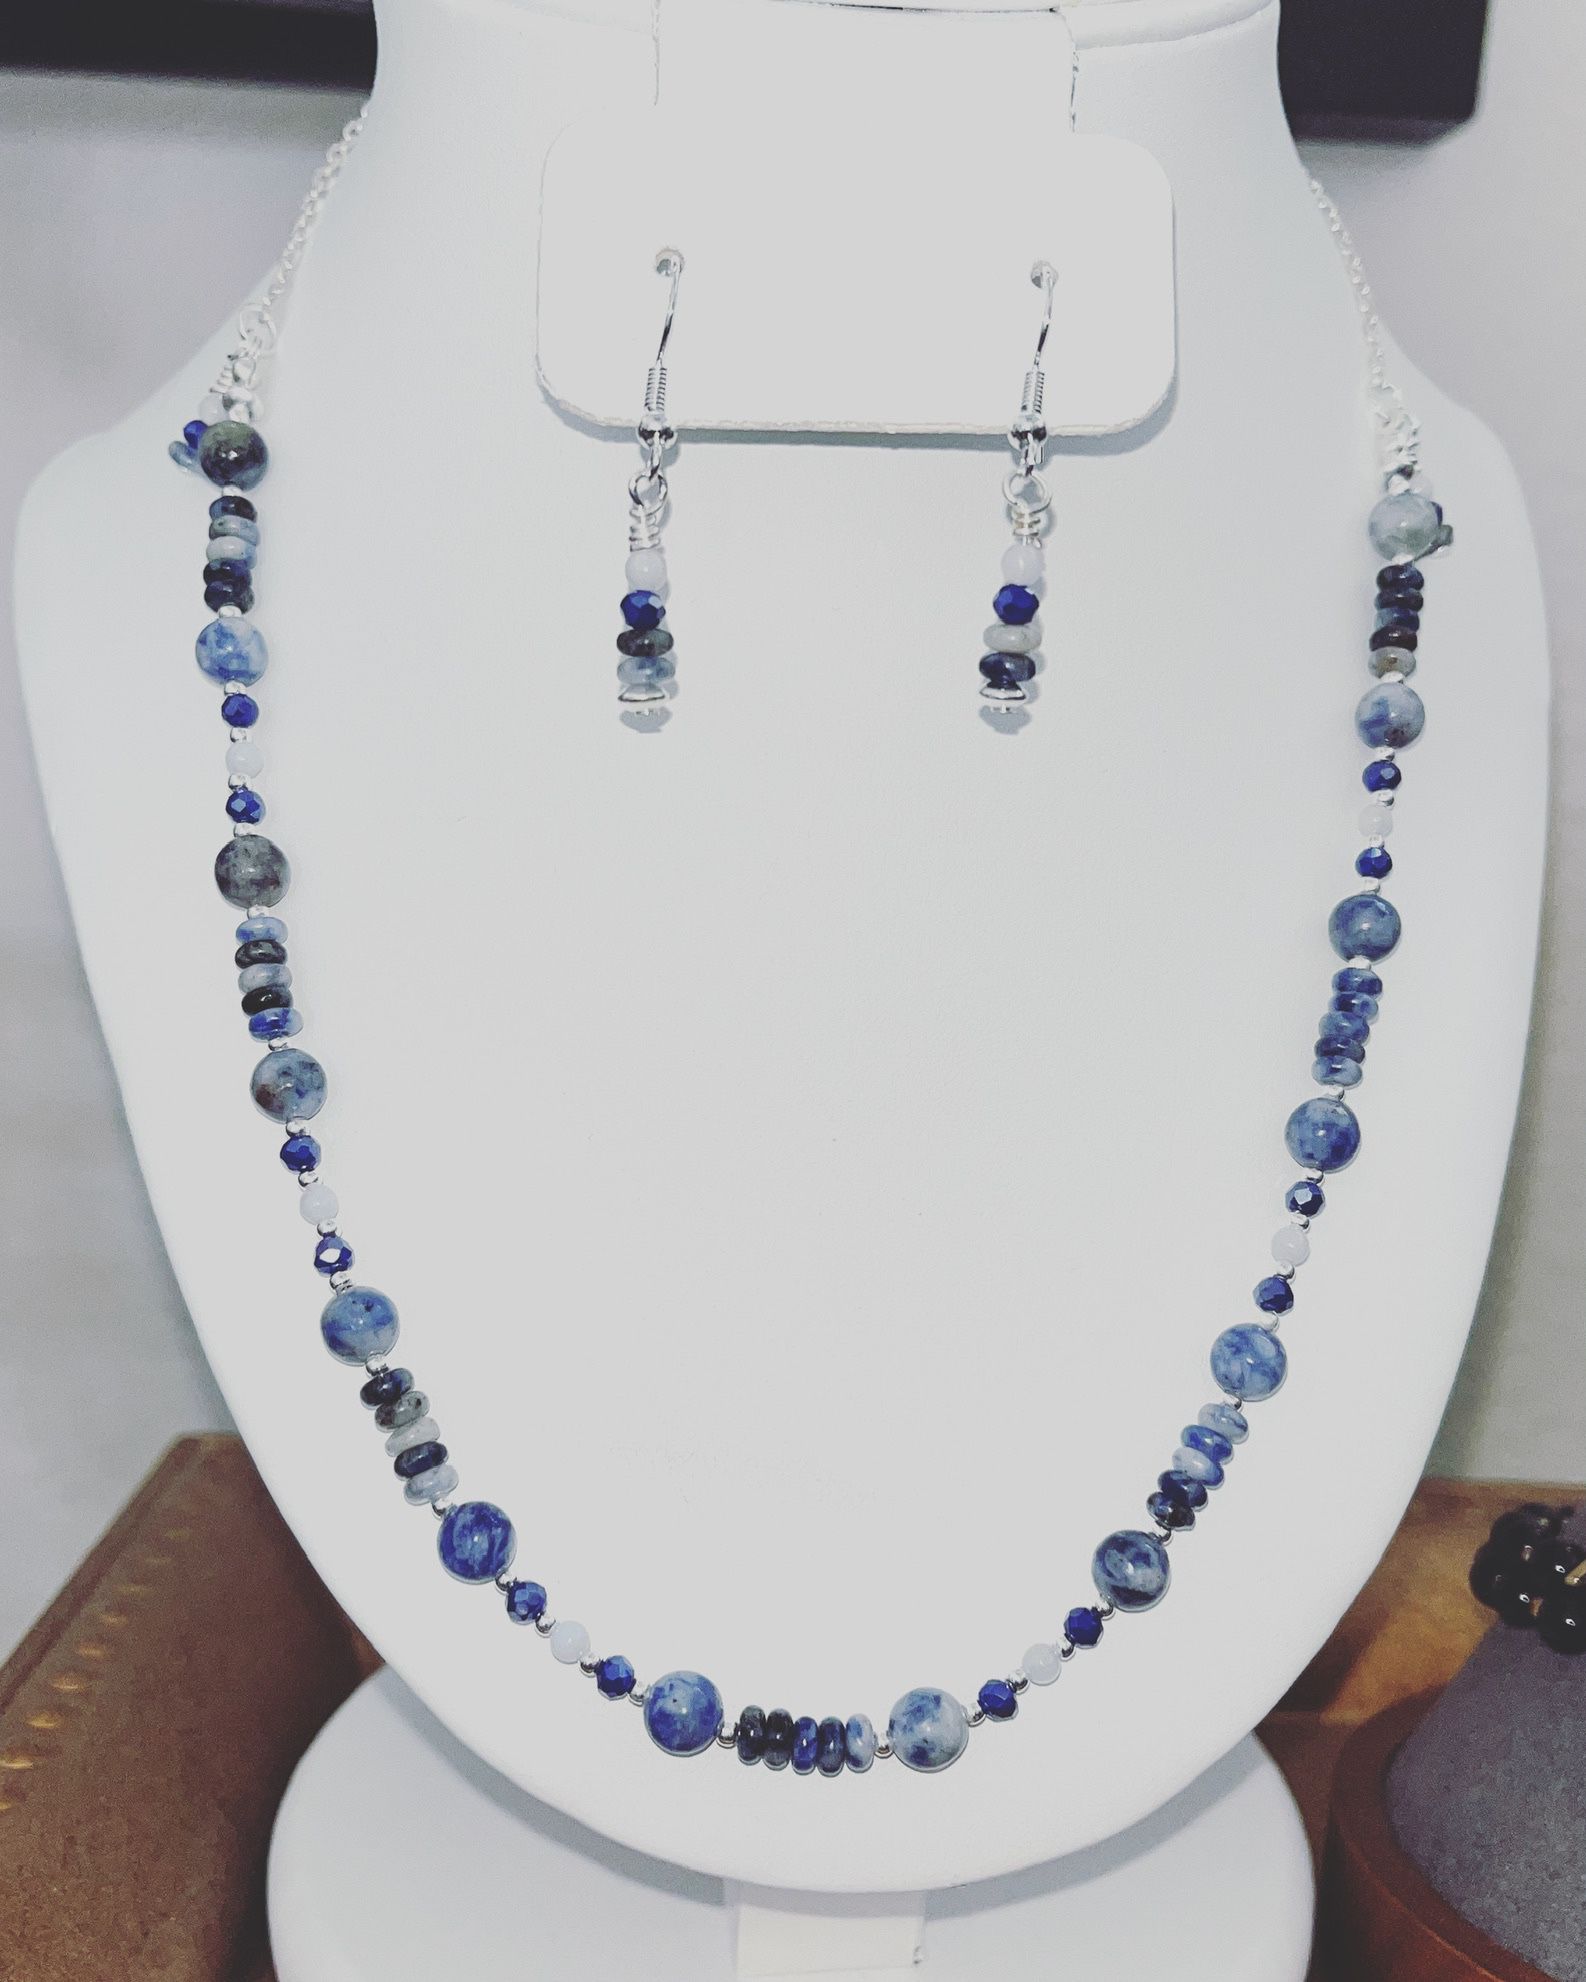 Blue Lace Sodalite Gemstone Necklace And Earrings Set 